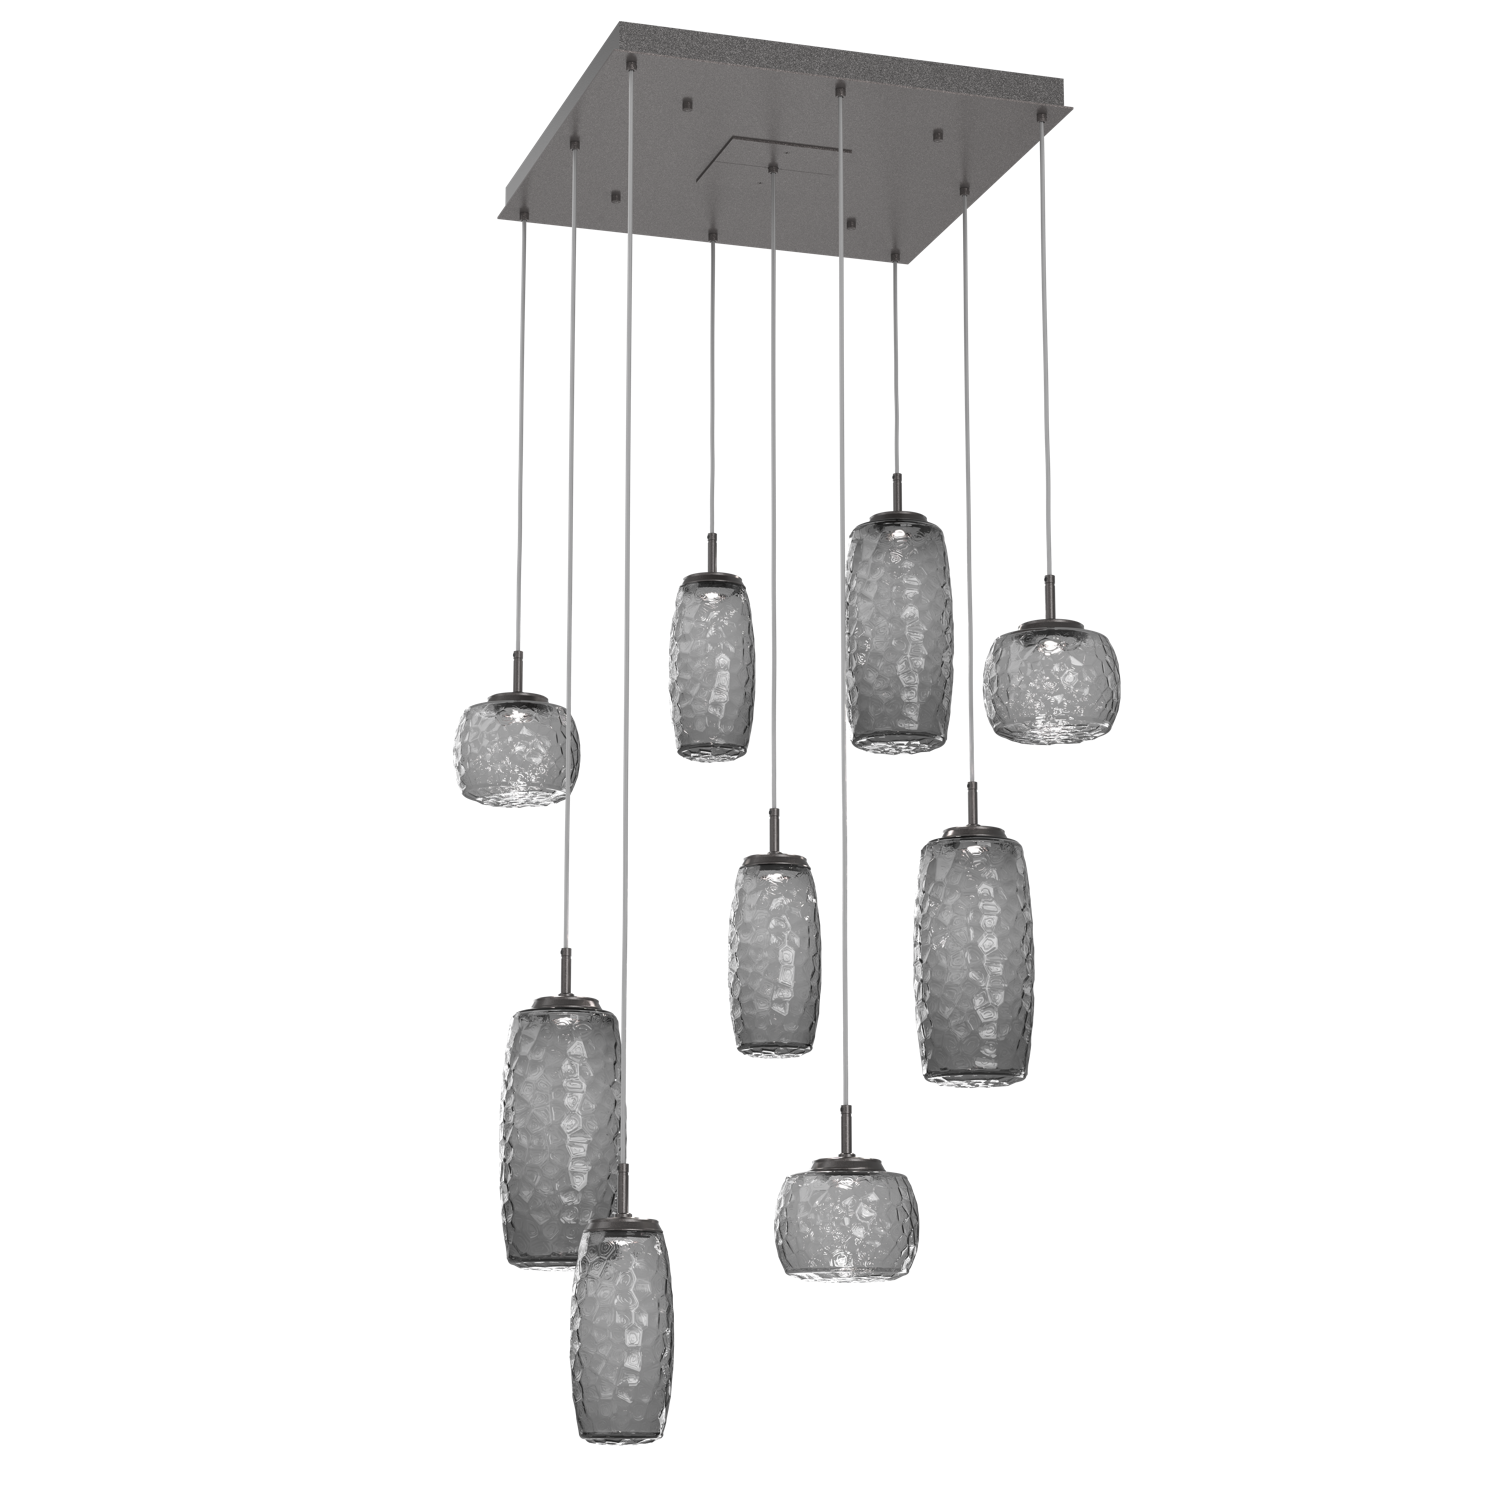 CHB0091-09-GP-S-Hammerton-Studio-Vessel-9-light-square-multi-pendant-chandelier-with-graphite-finish-and-smoke-blown-glass-shades-and-LED-lamping